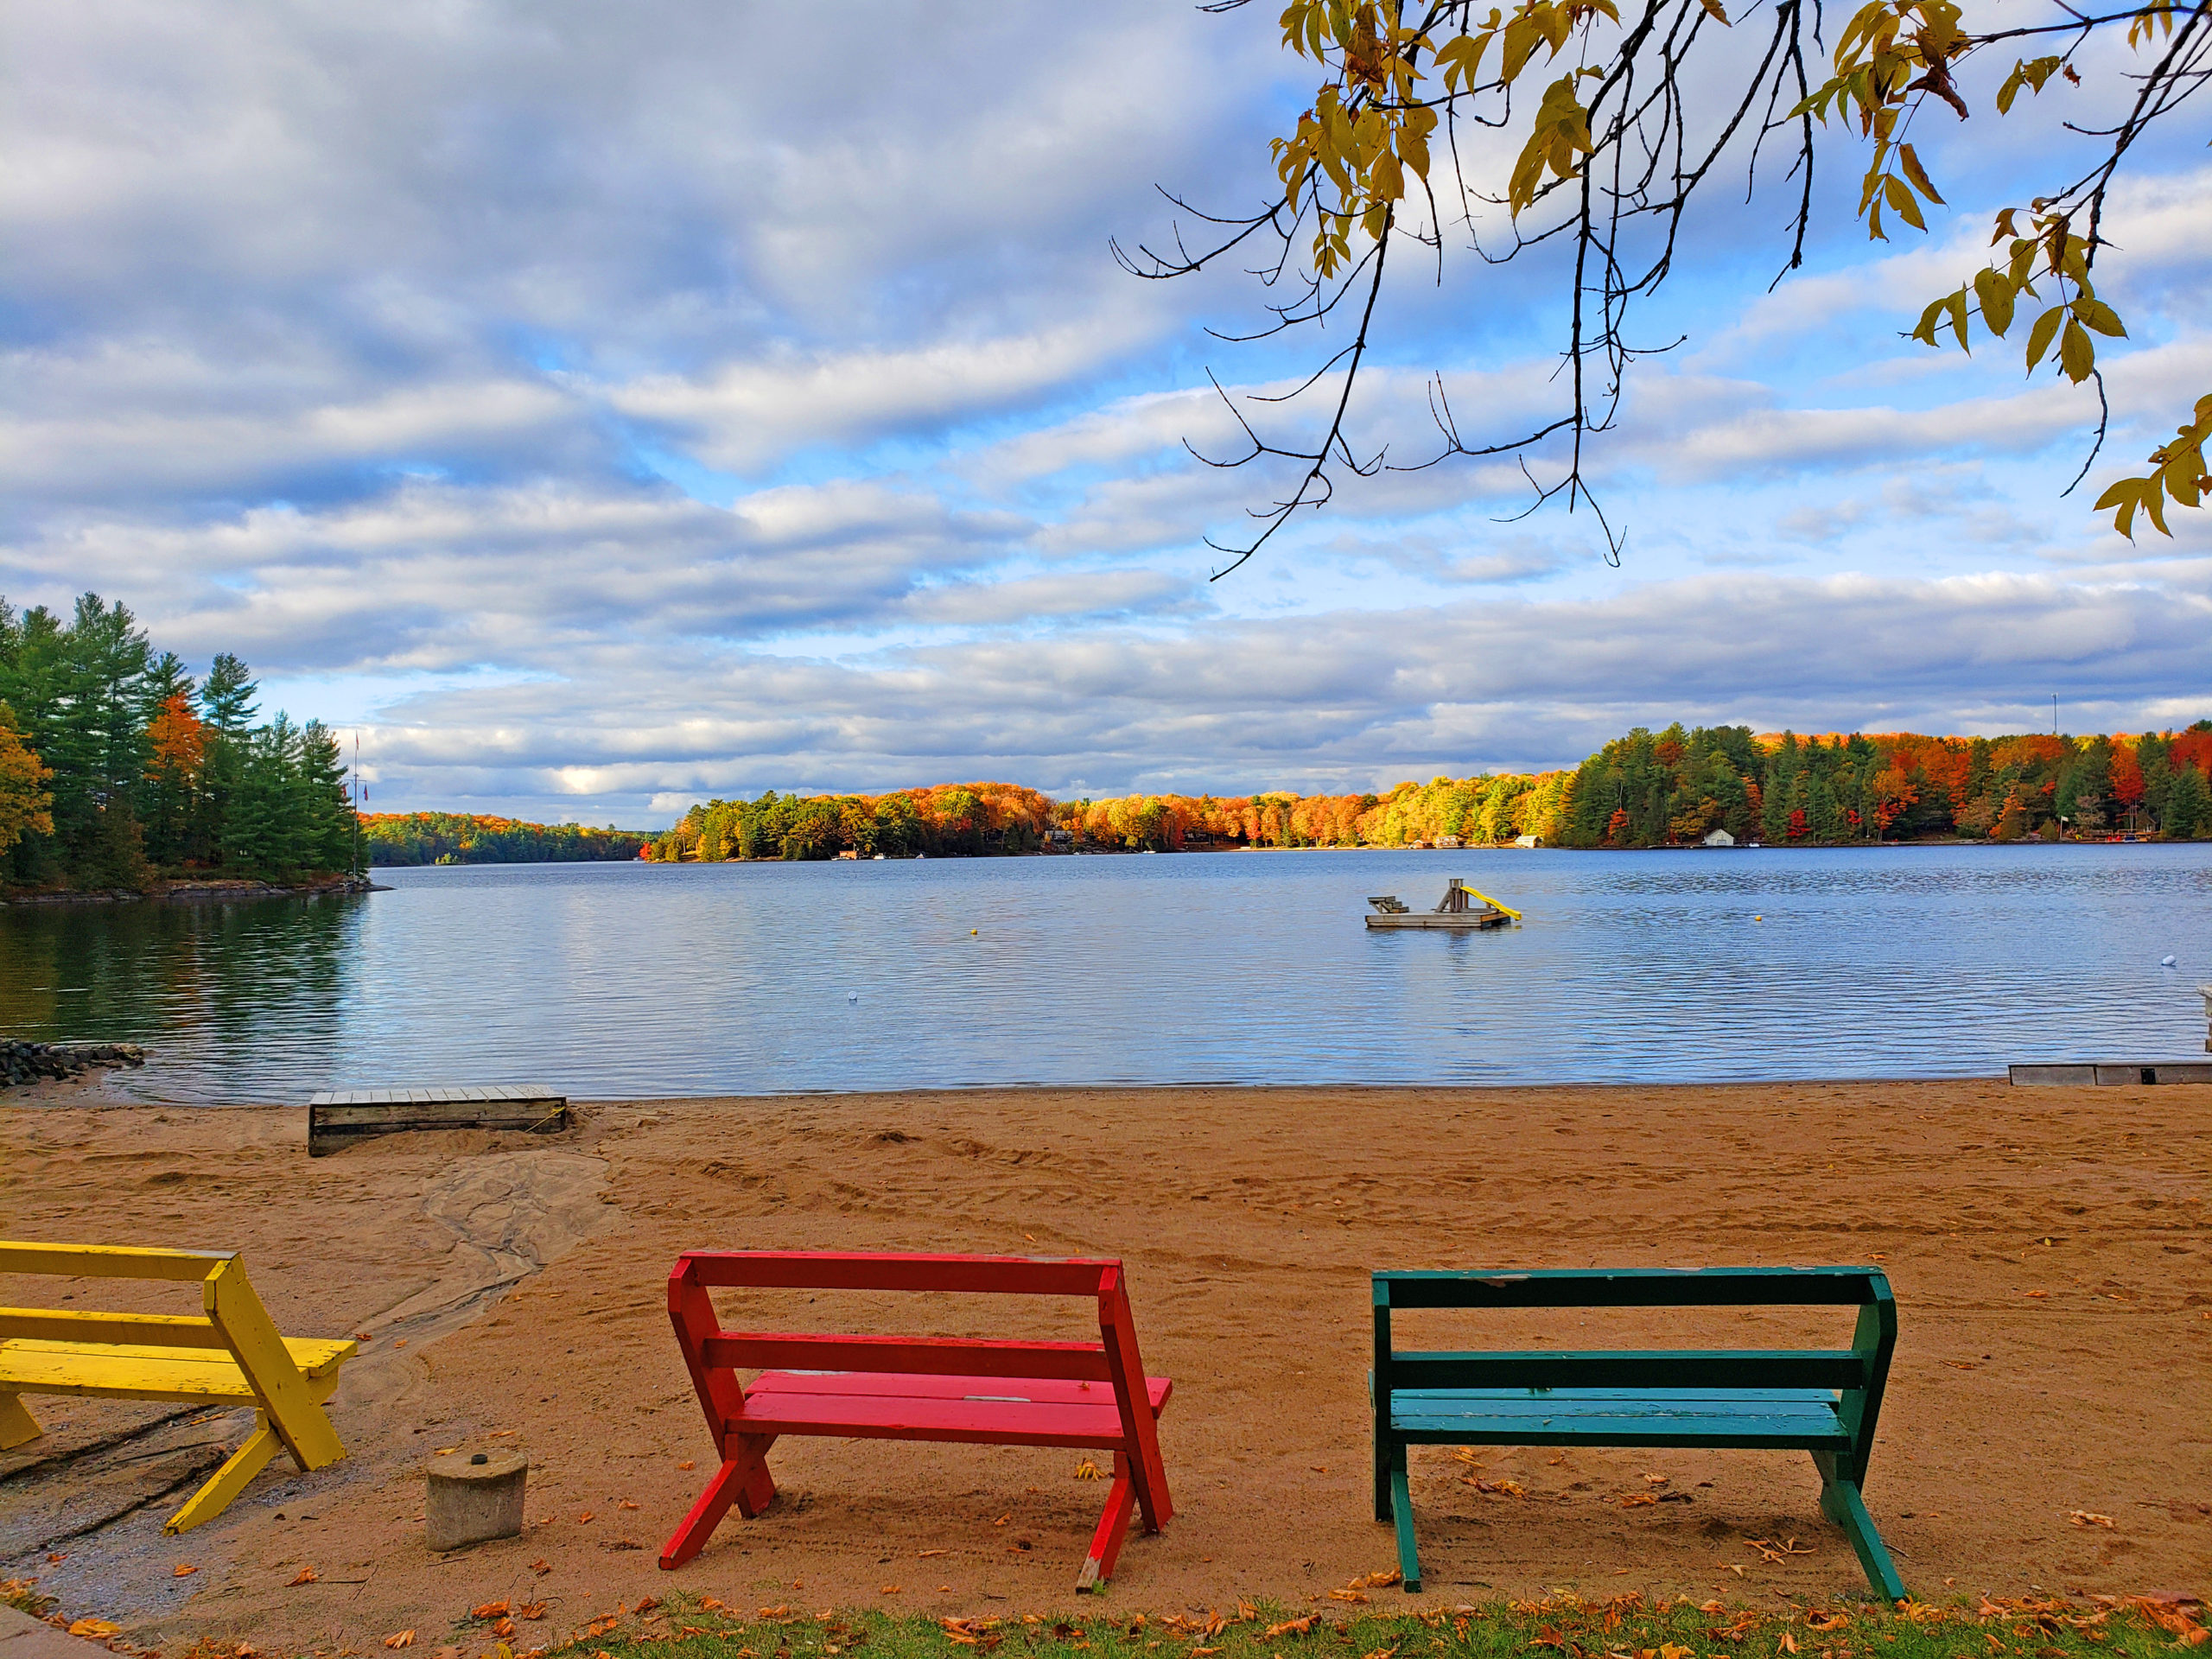 25 Photos Proving That Ontario, Canada Is The Best Place To View Autumn Leaves